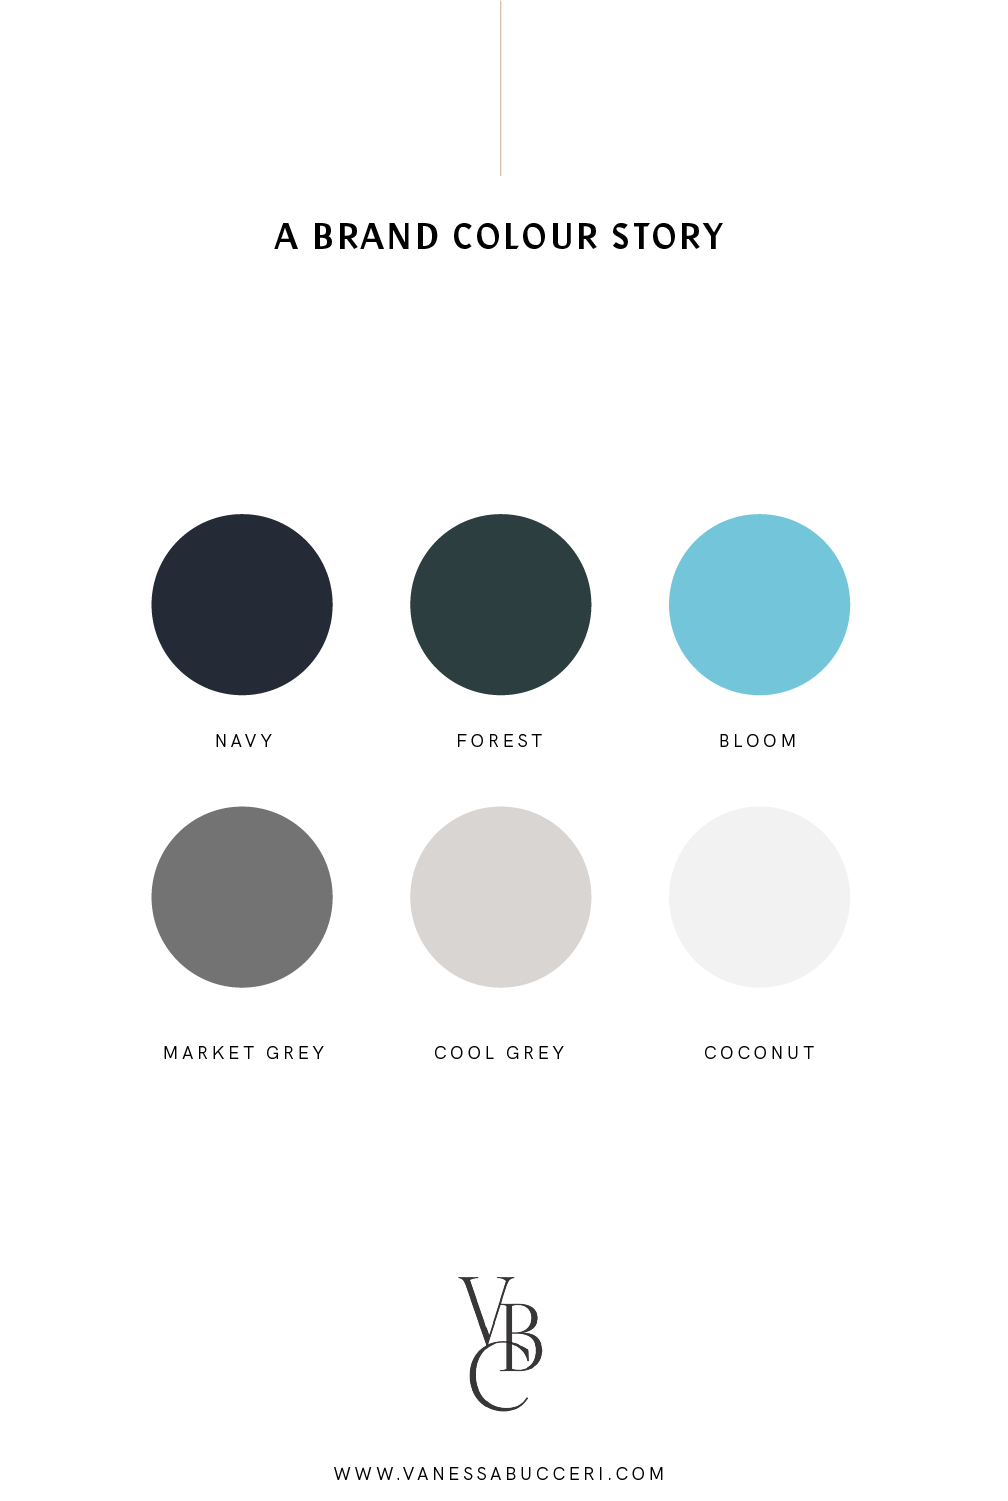 The colour palette for Kadie's brand identity